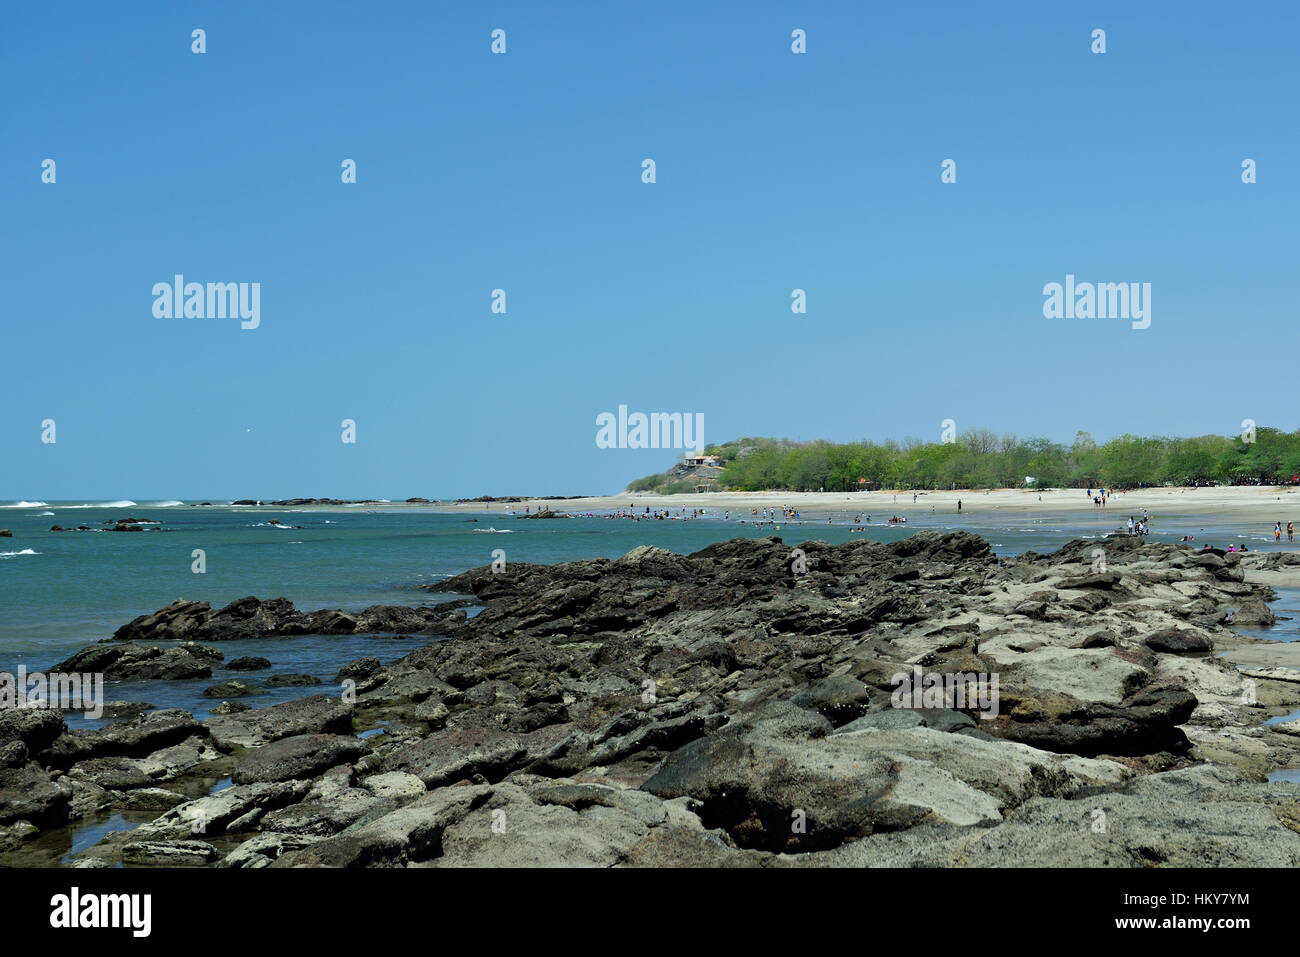 rock beach with people on sunny day with blue sky Stock Photo